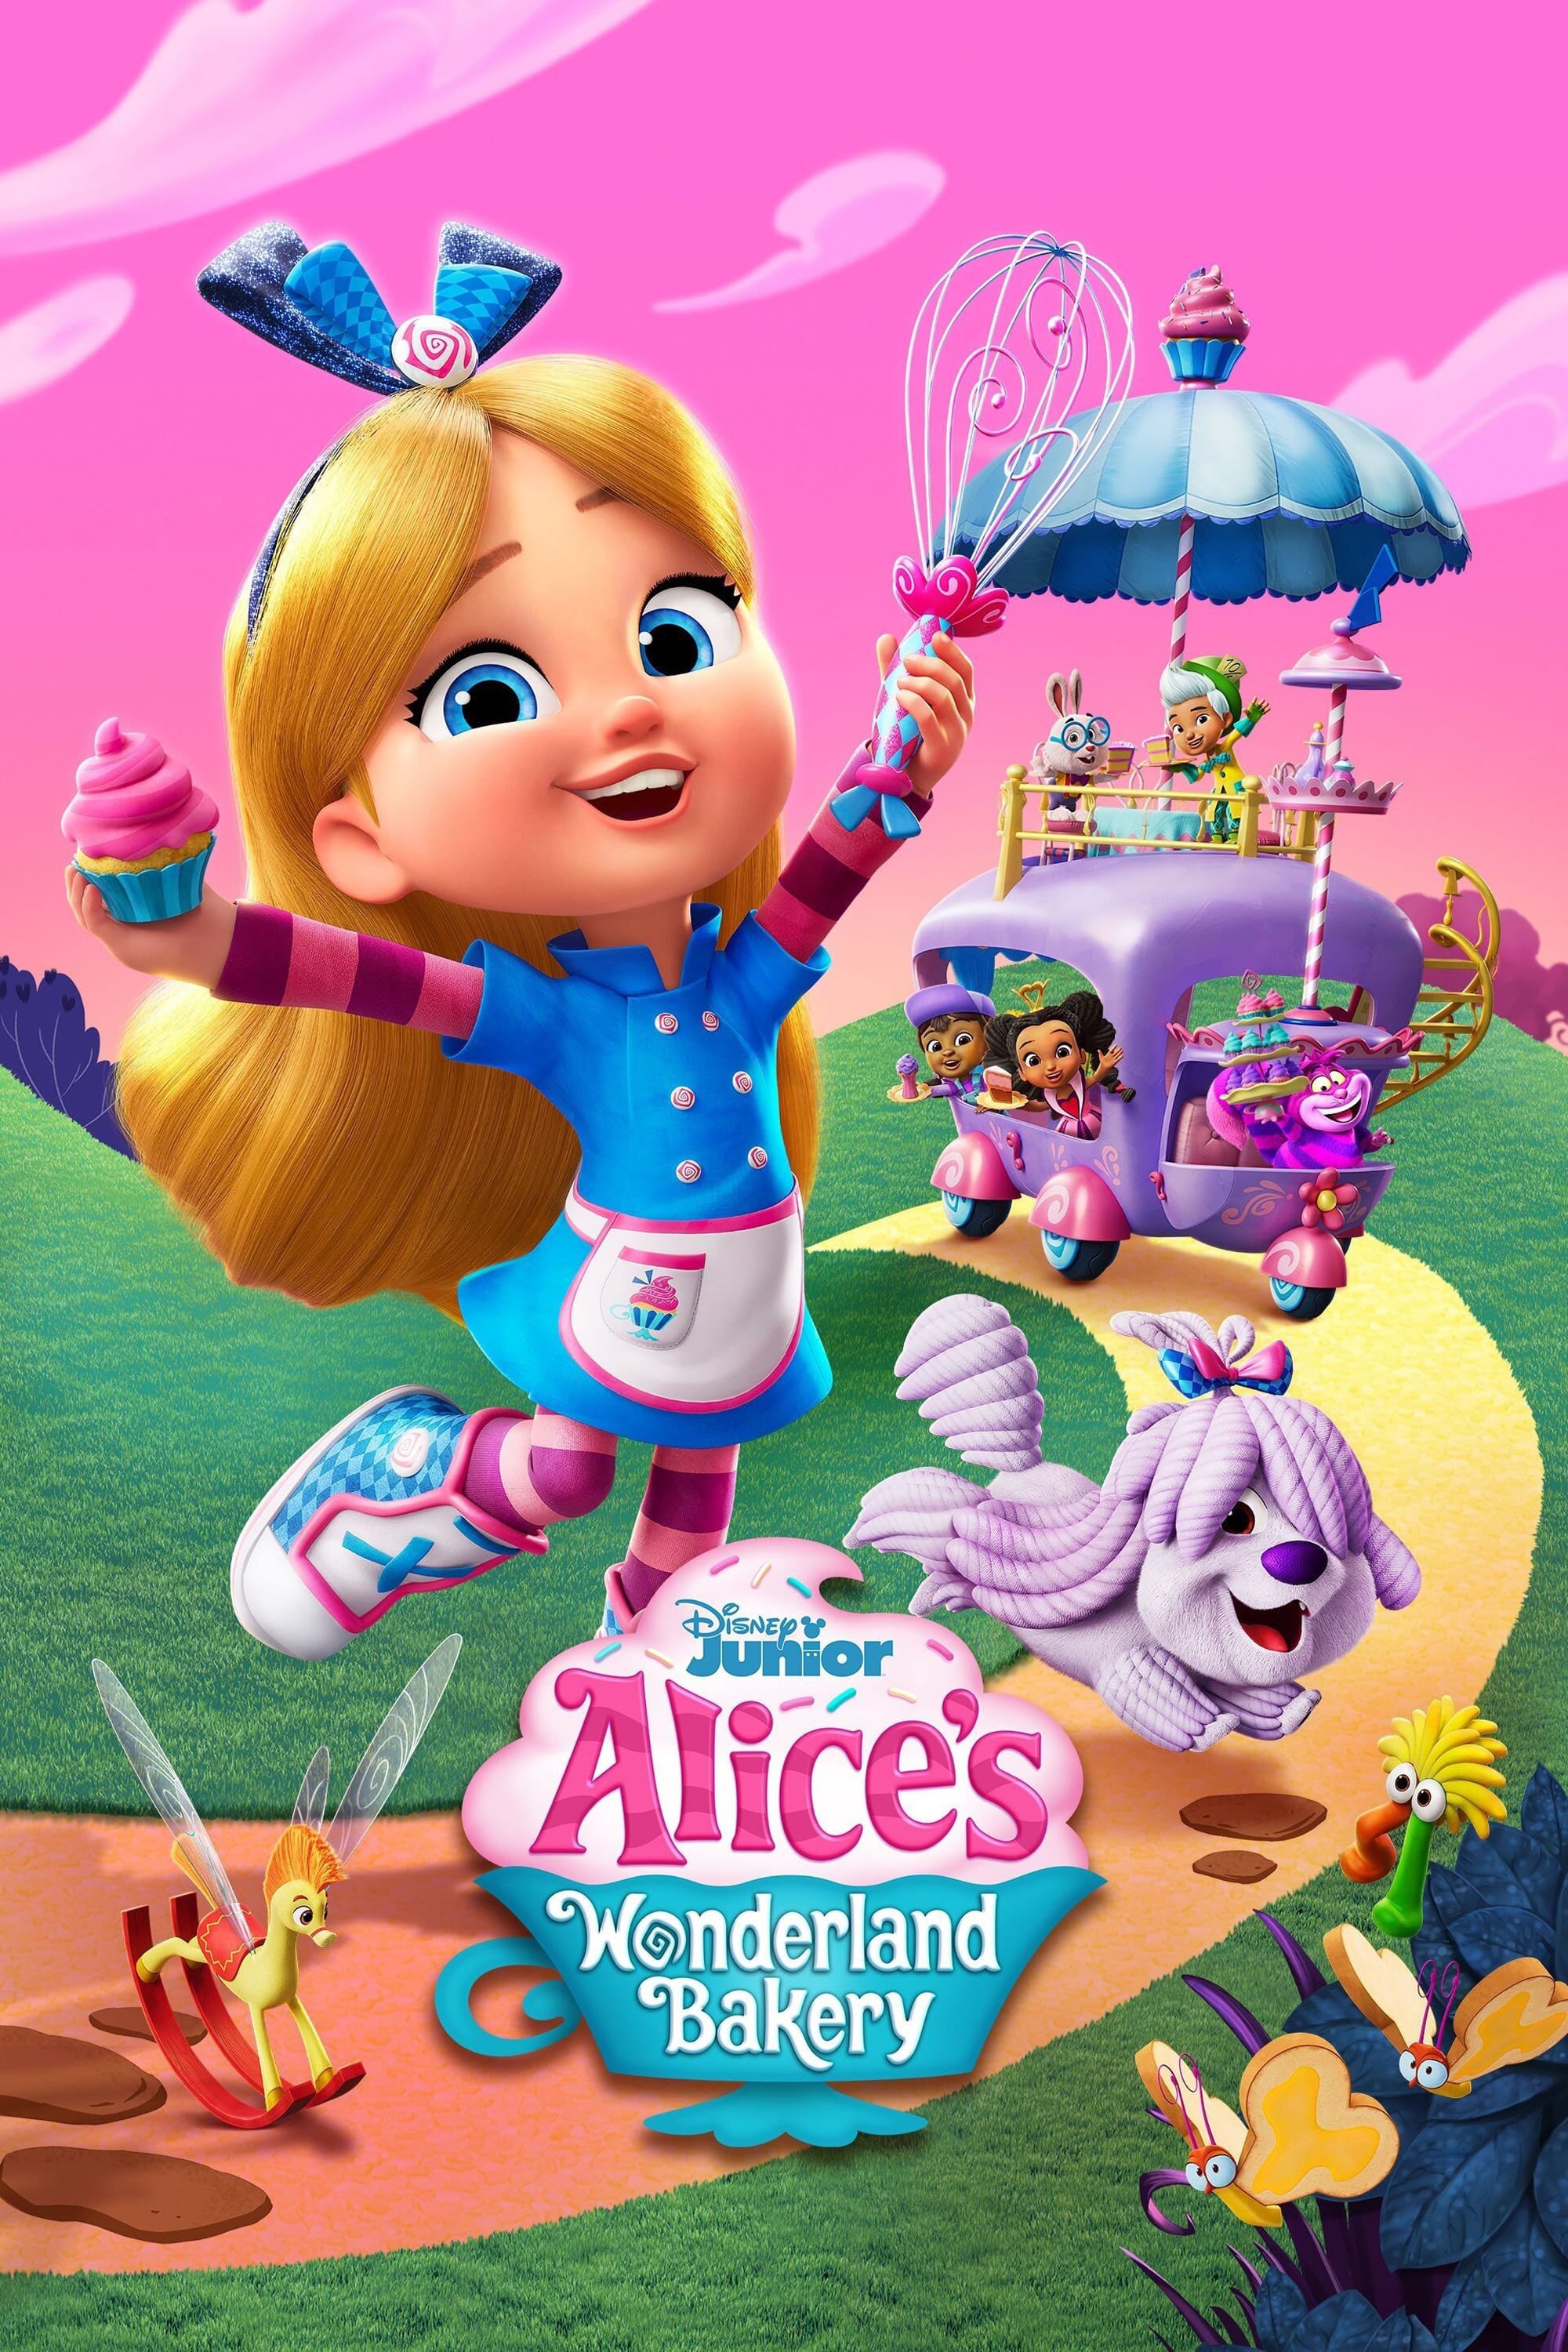 https://static.wikia.nocookie.net/international-entertainment-project/images/5/57/Alice%27s_Wonderland_Bakery_-_poster_%28English%29.jpg/revision/latest?cb=20230627035445